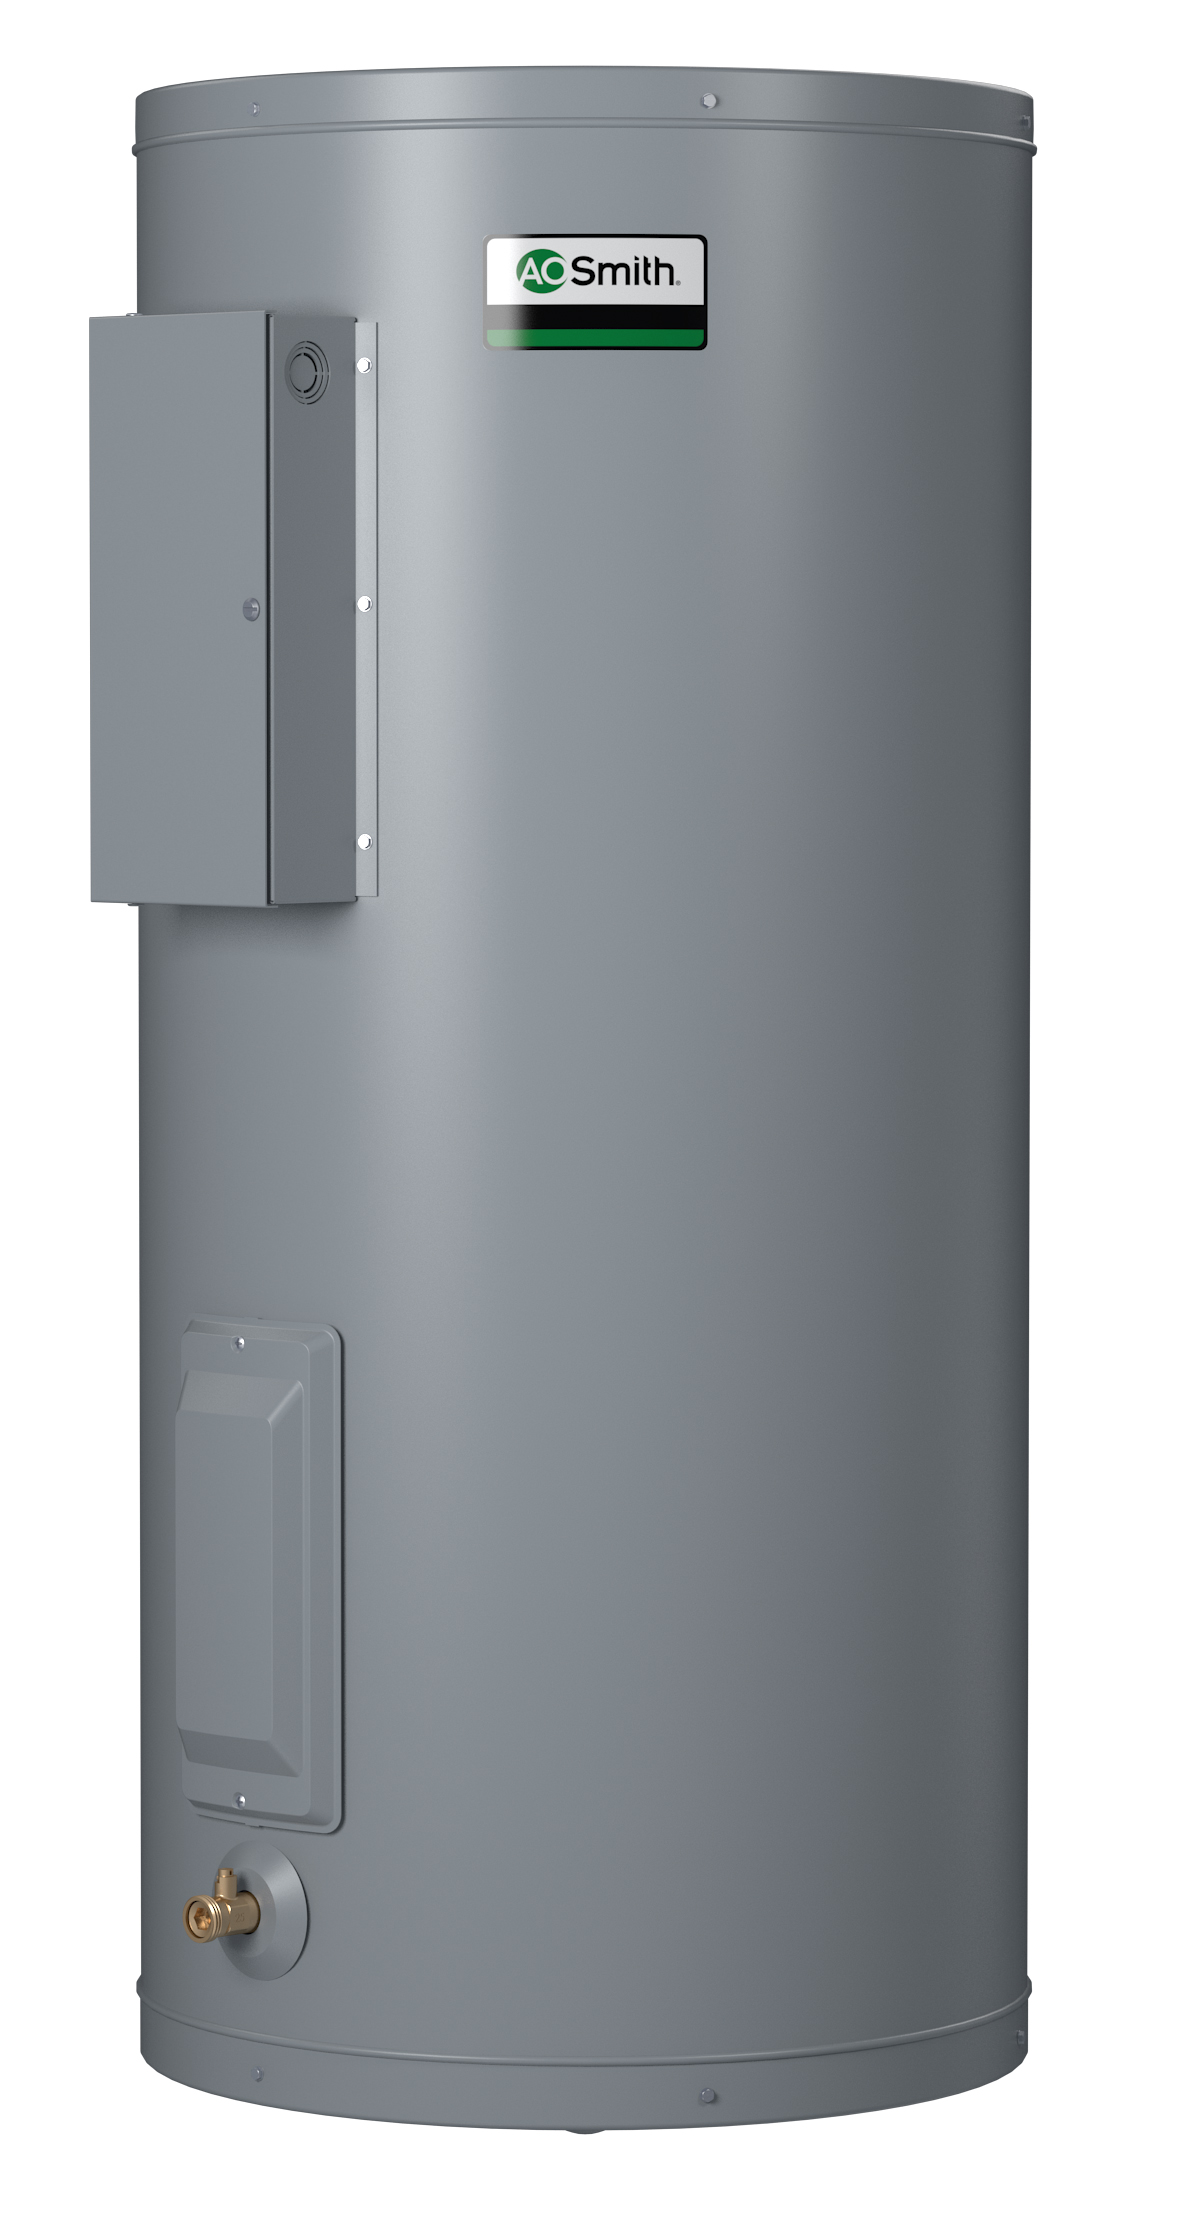 AO SMITH DEN-120D: 120 GALLONS, 12.2KW, 240 VOLT, 3 PHASE, (2-6100 WATT ELEMENTS, SIMULTANEOUS WIRING), DURA-POWER, LIGHT DUTY COMMERCIAL ELECTRIC WATER HEATER